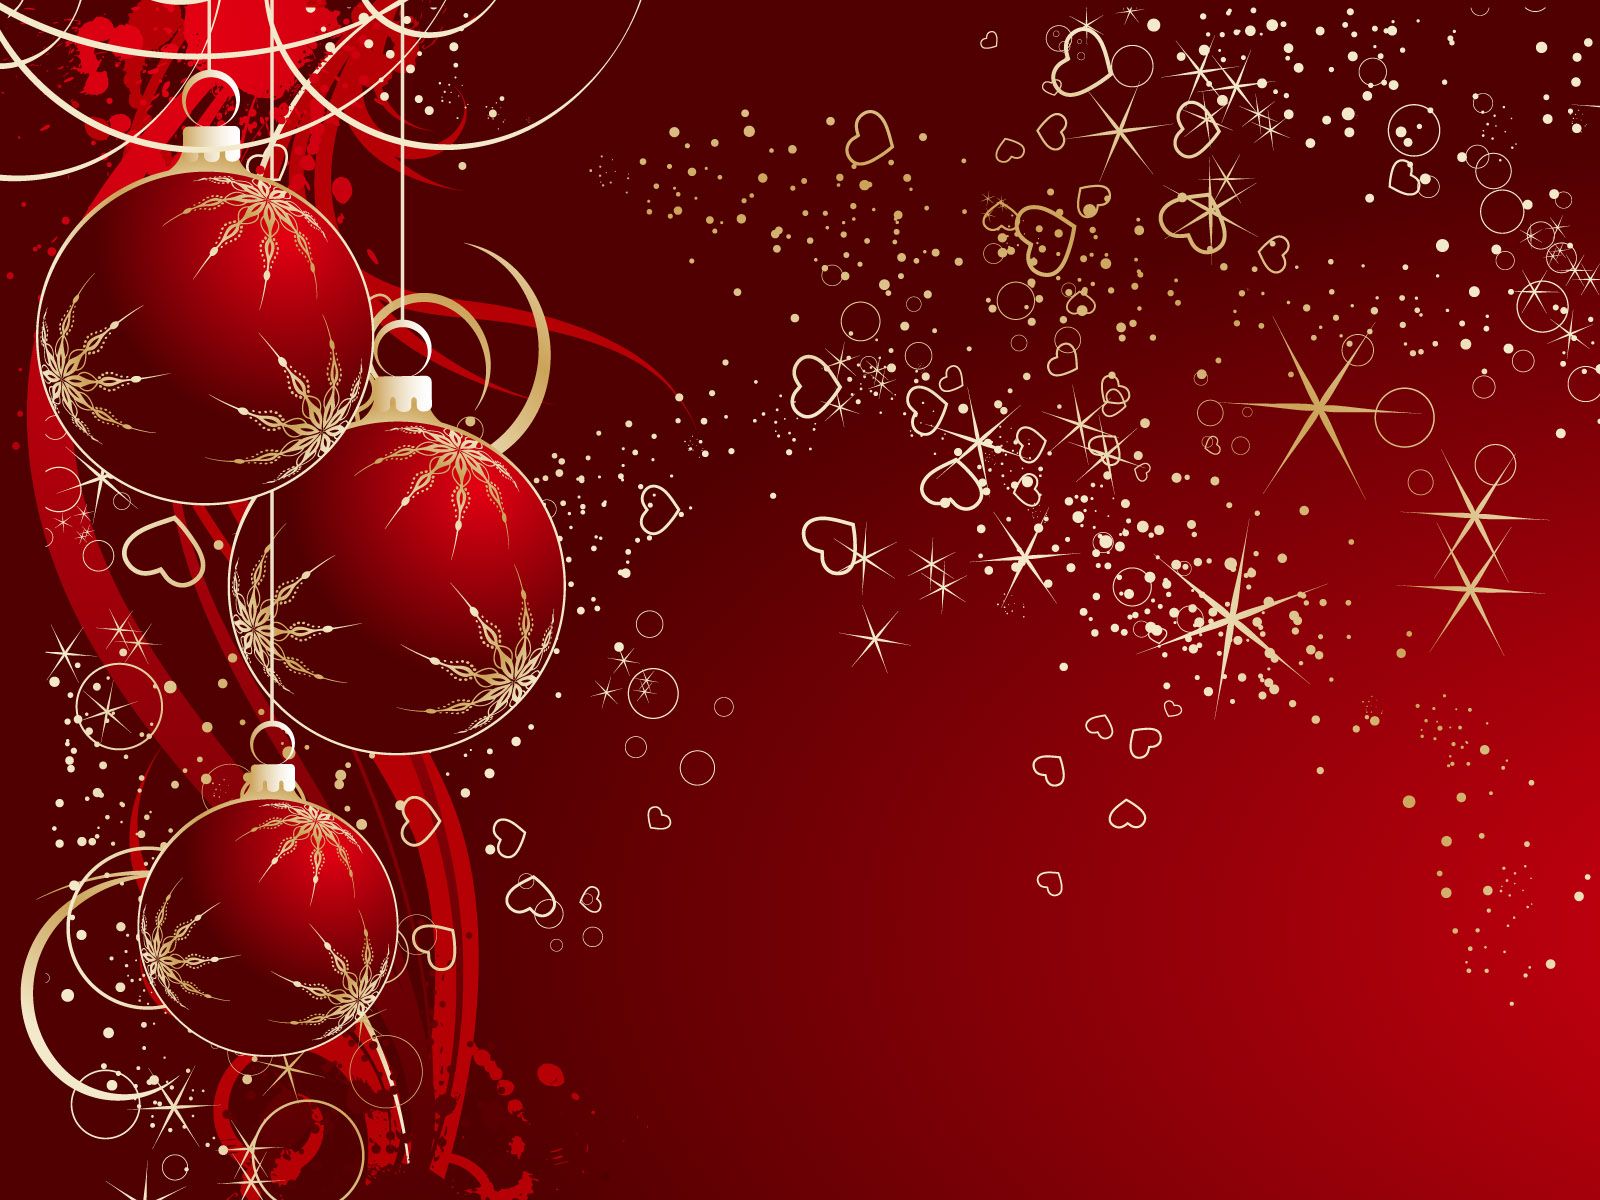 2015 hd Christmas backgrounds - wallpapers, images, photos, pictures